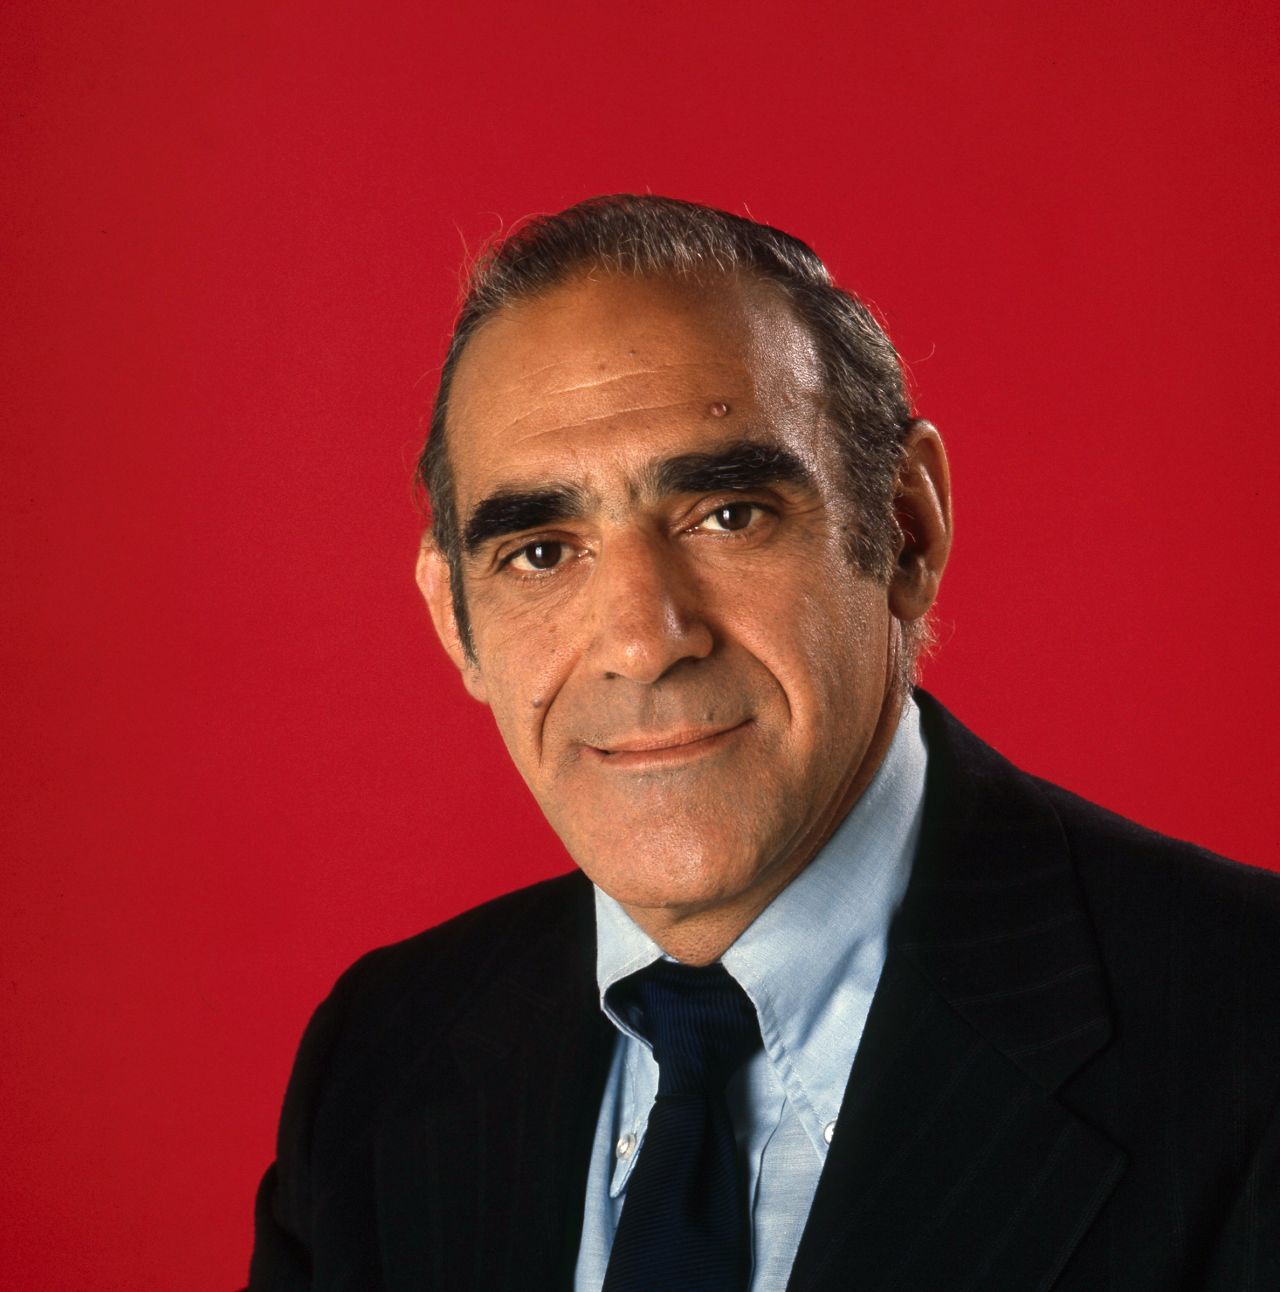 <a href="http://www.cnn.com/2016/01/26/entertainment/abe-vigoda-dead-obit-feat/" target="_blank">Abe Vigoda</a>, the long-surviving "Godfather" and "Barney Miller" actor, died January 26 at age 94. Vigoda became famous for his role as the decrepit detective Phil Fish on the television series "Barney Miller," but it was the inaccurate reporting of his death in 1982 that led to a decades-long joke that he was still alive. He played into the joke in late-night television appearances with Conan O'Brien and David Letterman. 